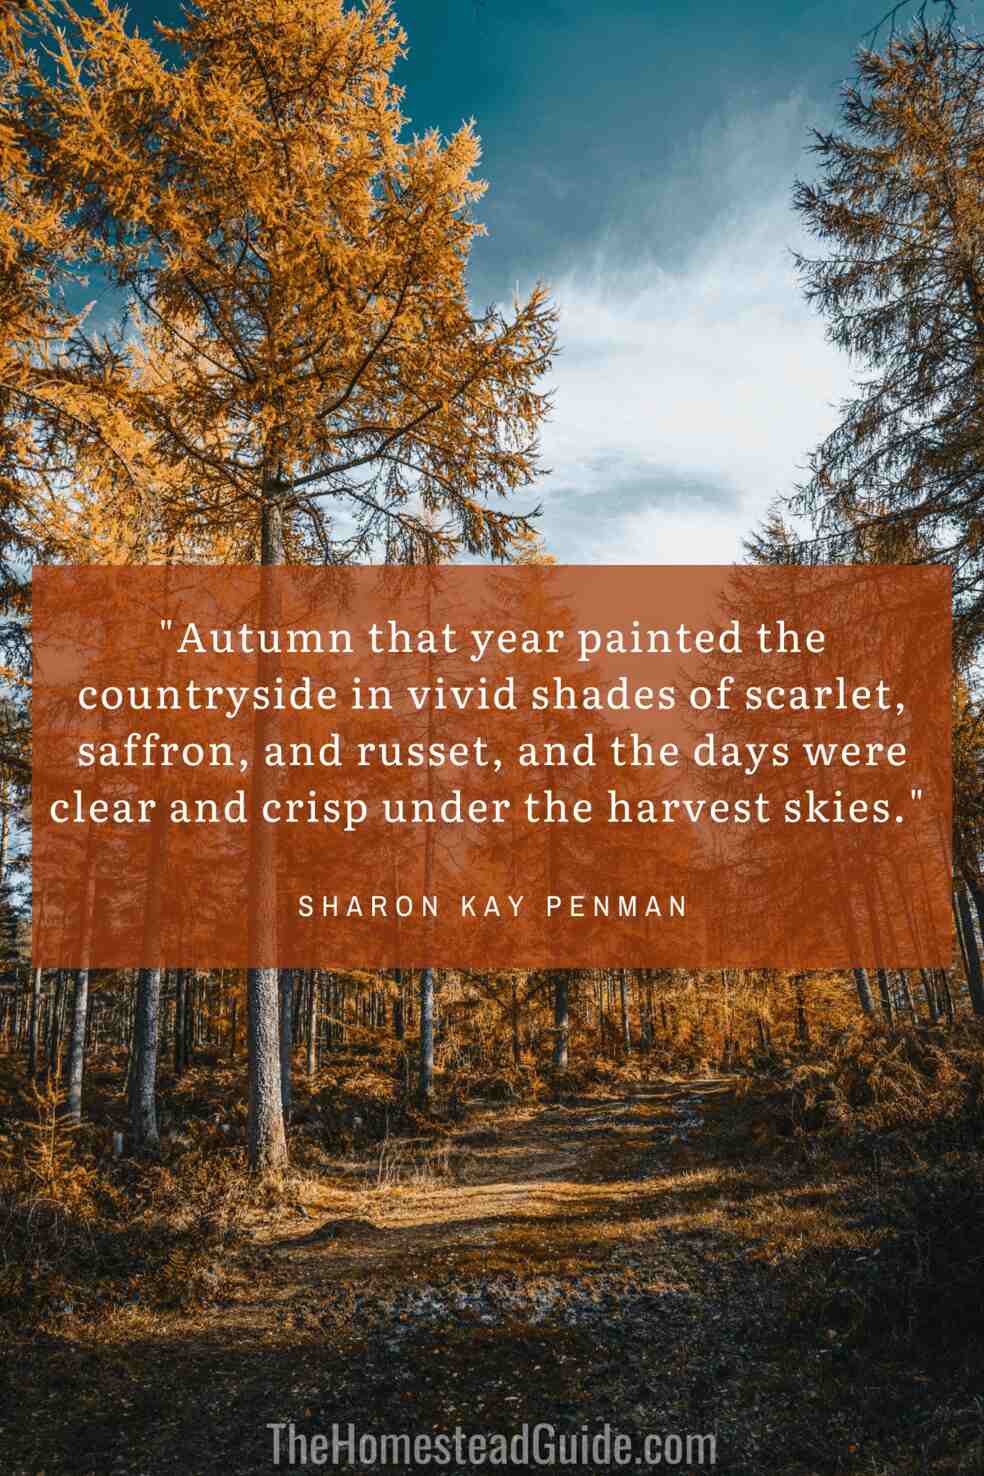 Autumn that year painted the countryside in vivid shades of scarlet, saffron, and russet, and the days were clear and crisp under the harvest skies.